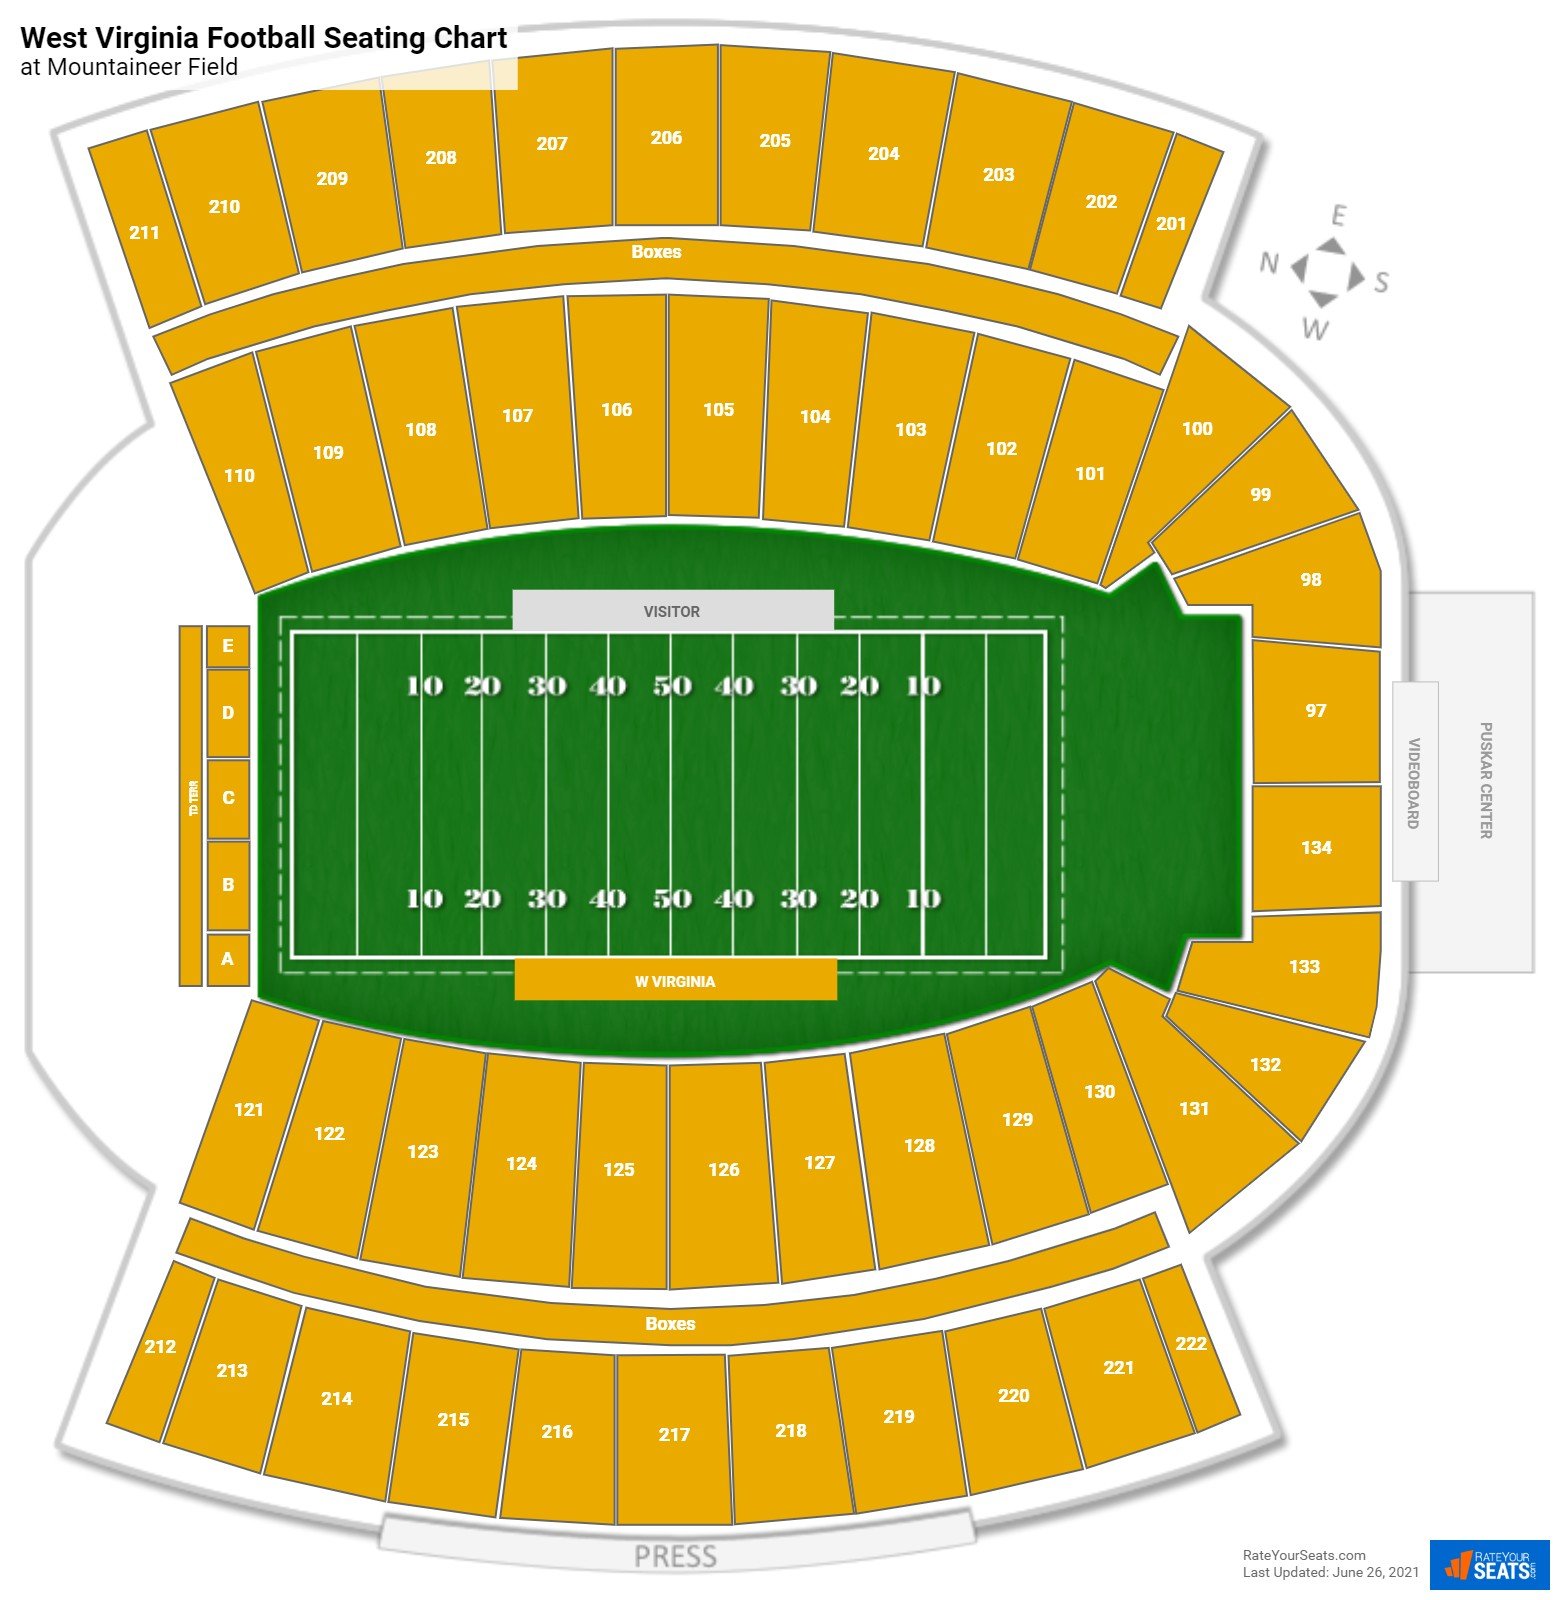 West Virginia Mountaineers Seating Chart at Mountaineer Field